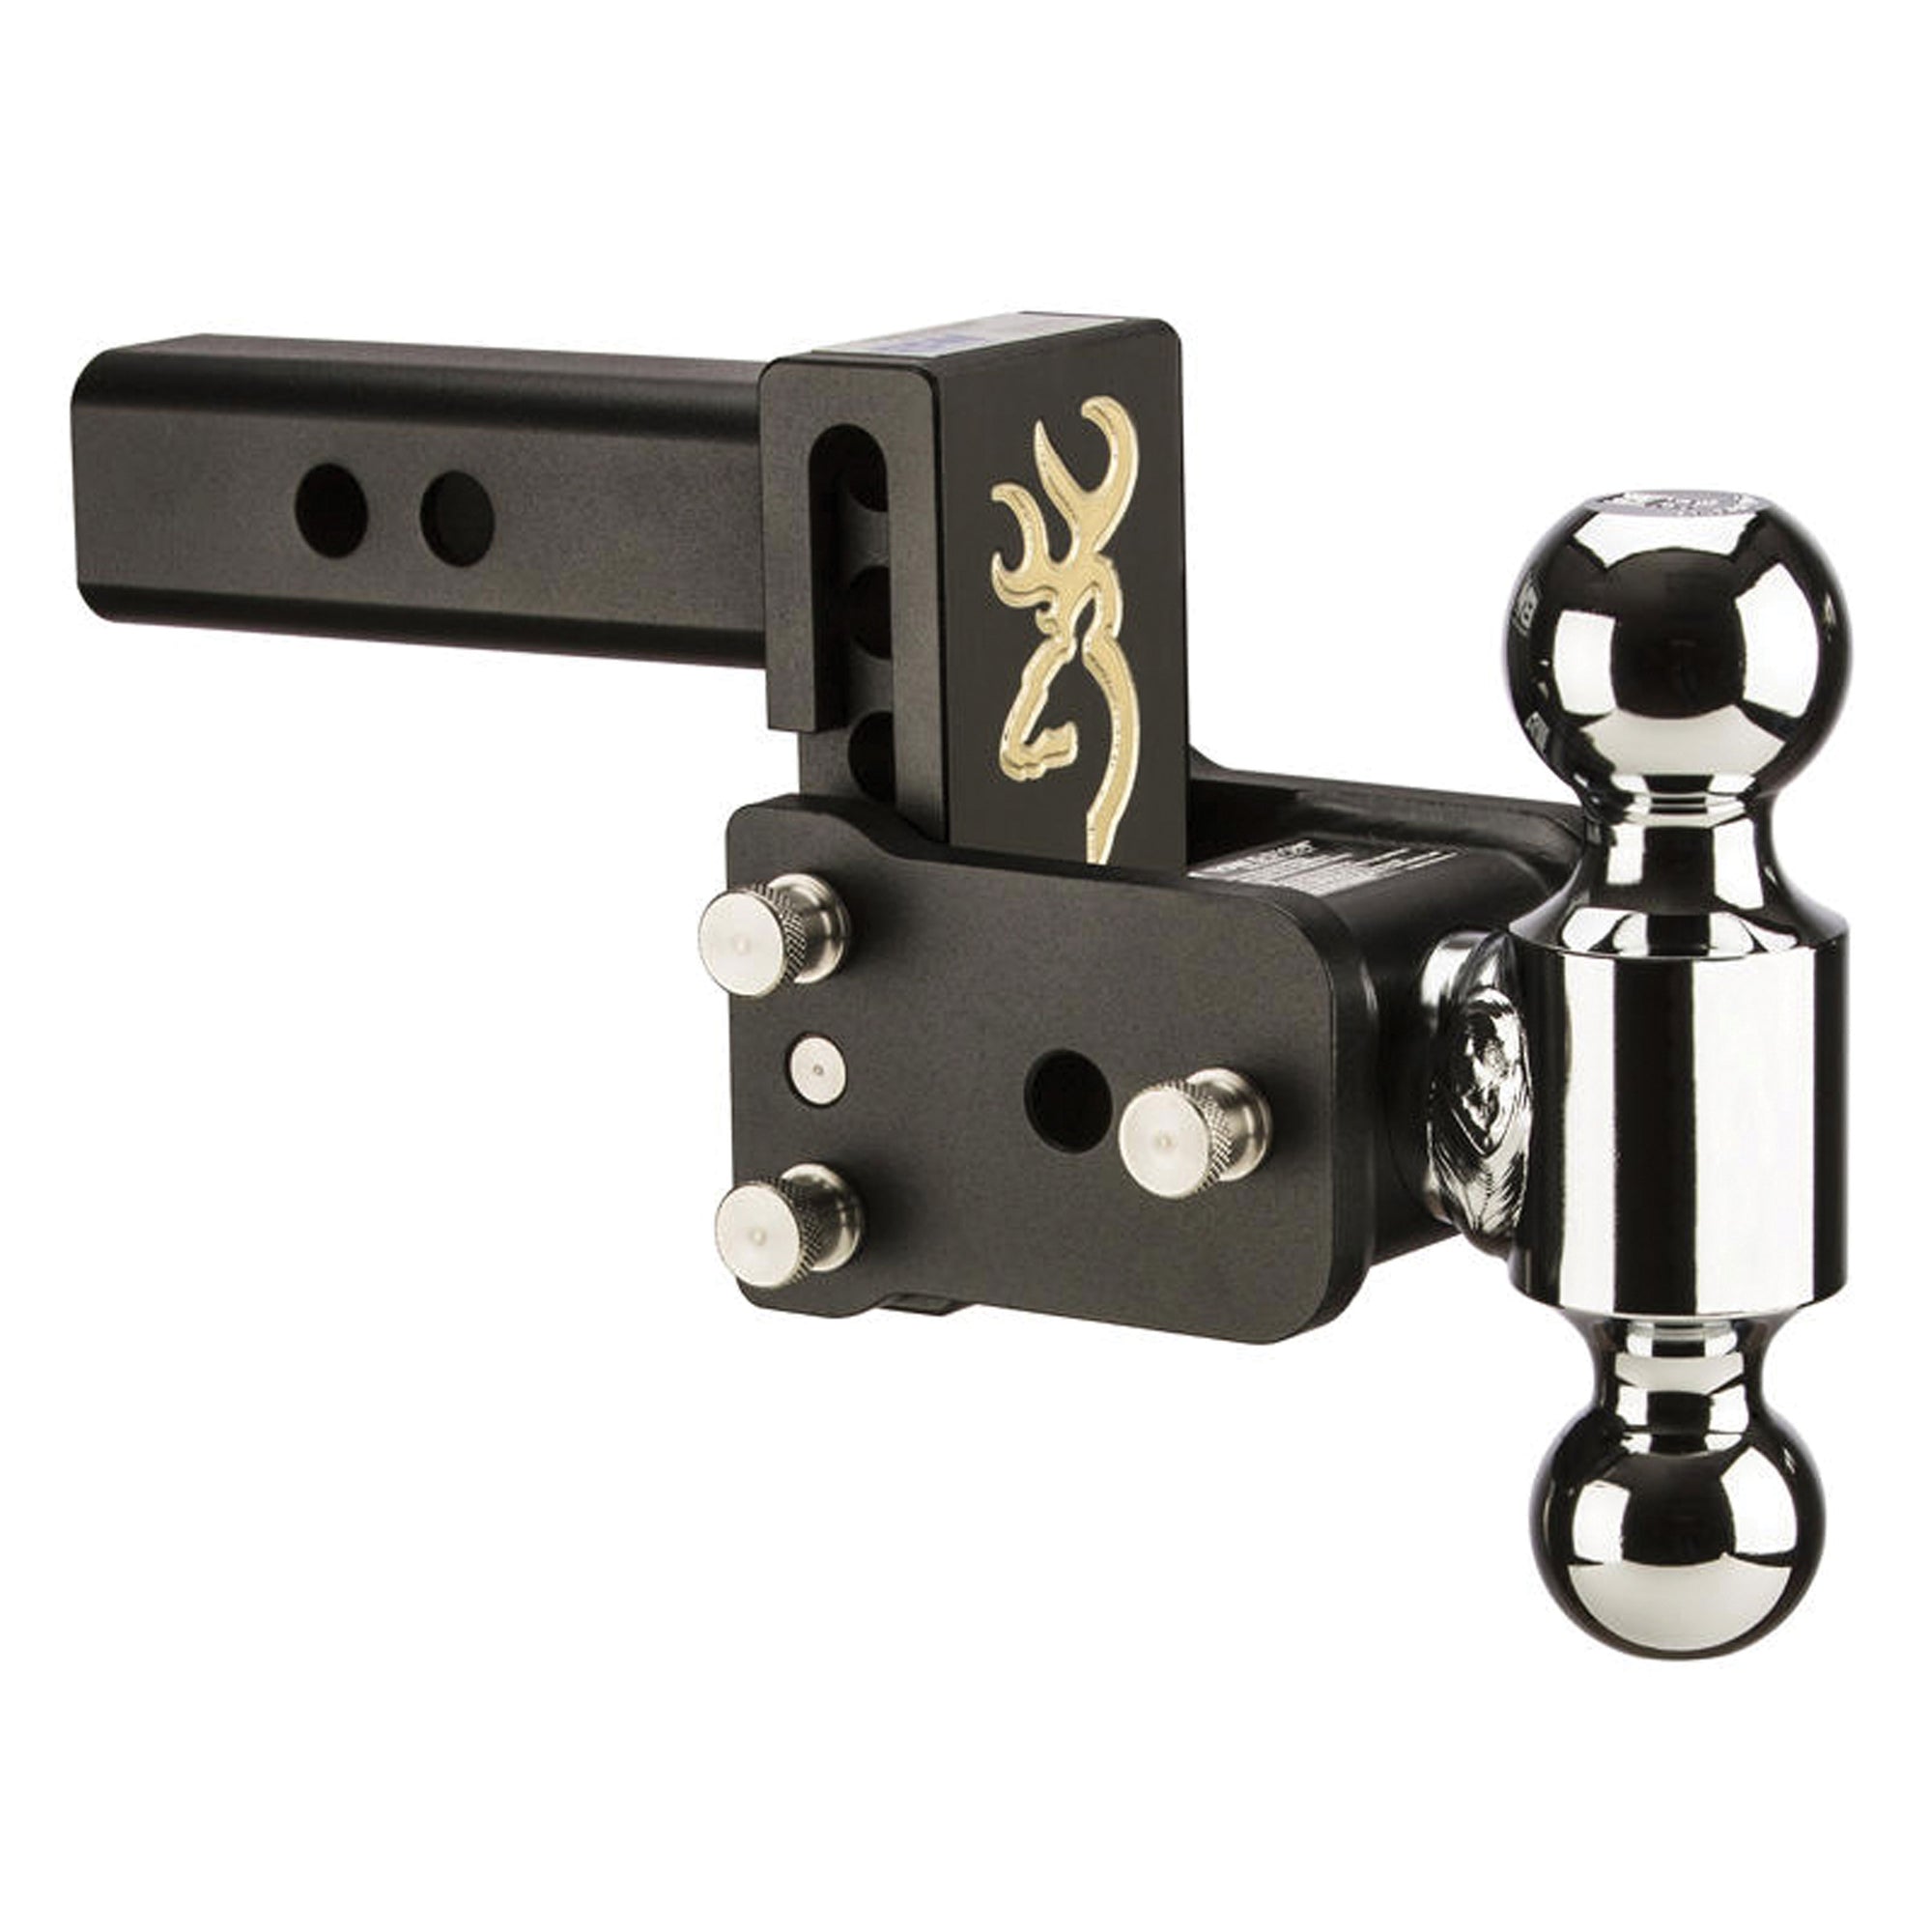 B&W Trailer Hitches TS10037BB Tow and Stow Adjustable Ball Mount - 2-5/16" & 2" Ball, 5" Drop, 5.5" Rise, Browning